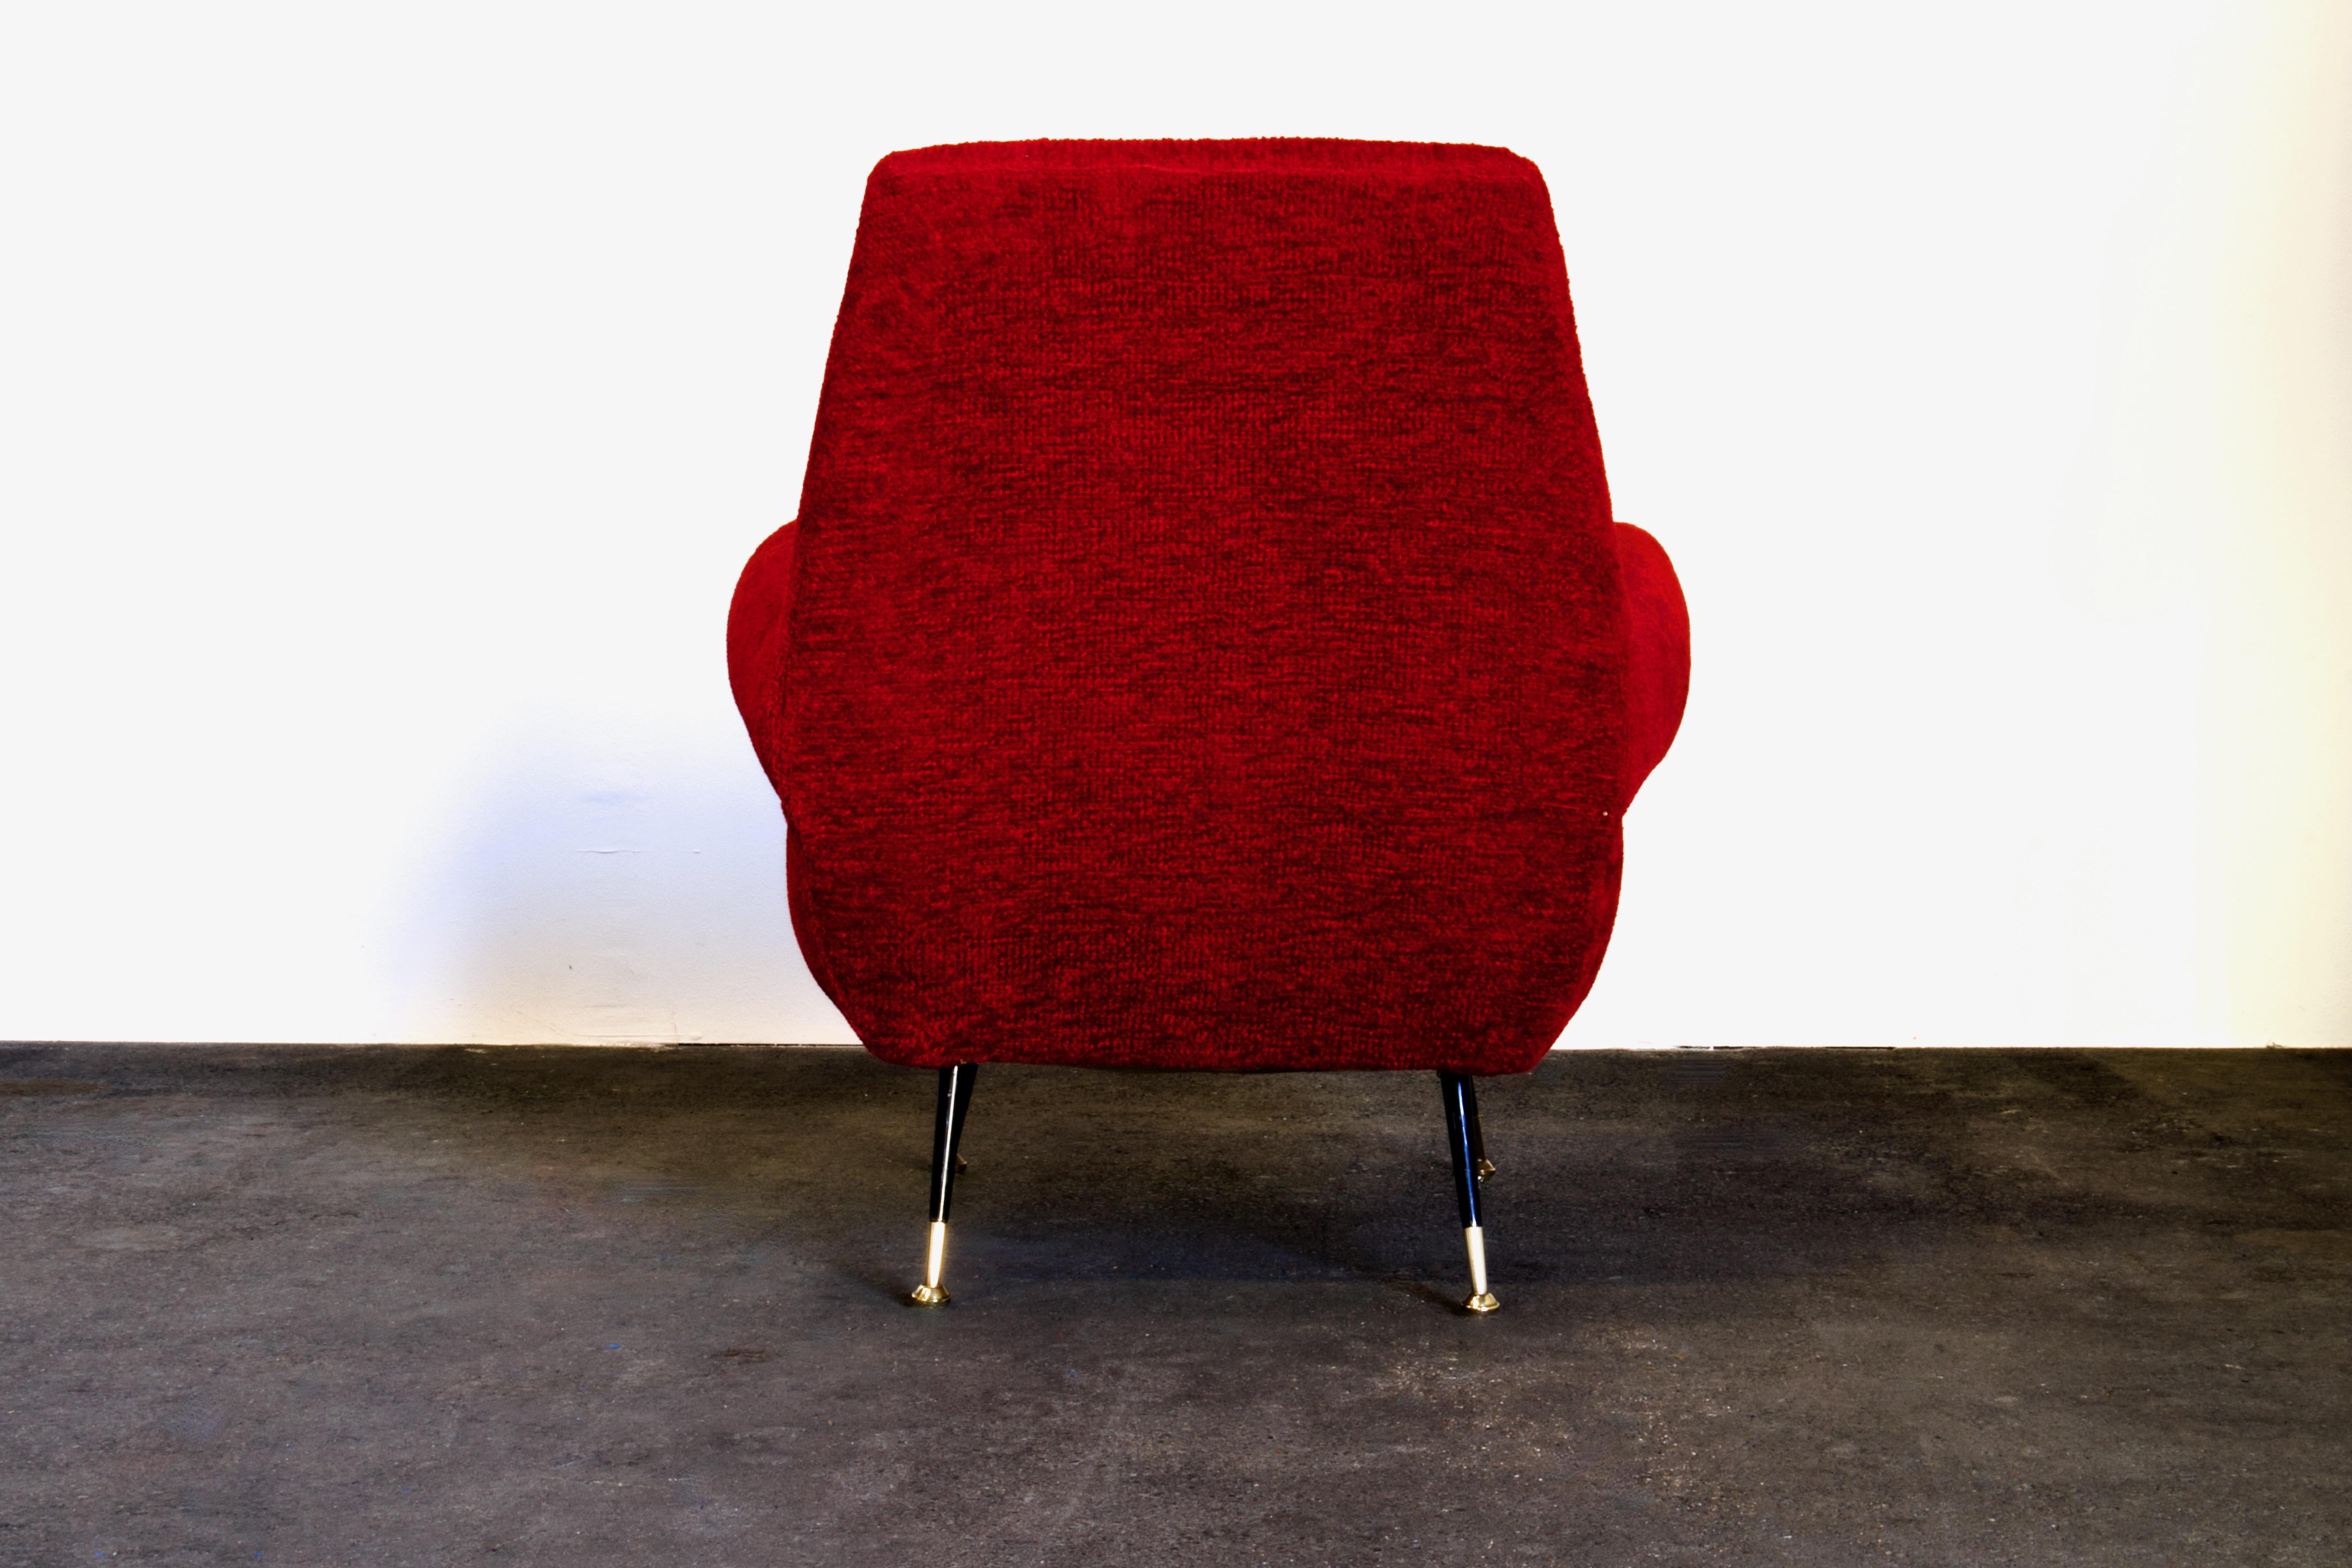 Brass Pair of Gigi Radice Club / Lounge Armchairs for Minotti, 1950s Italy, Red Fabric For Sale